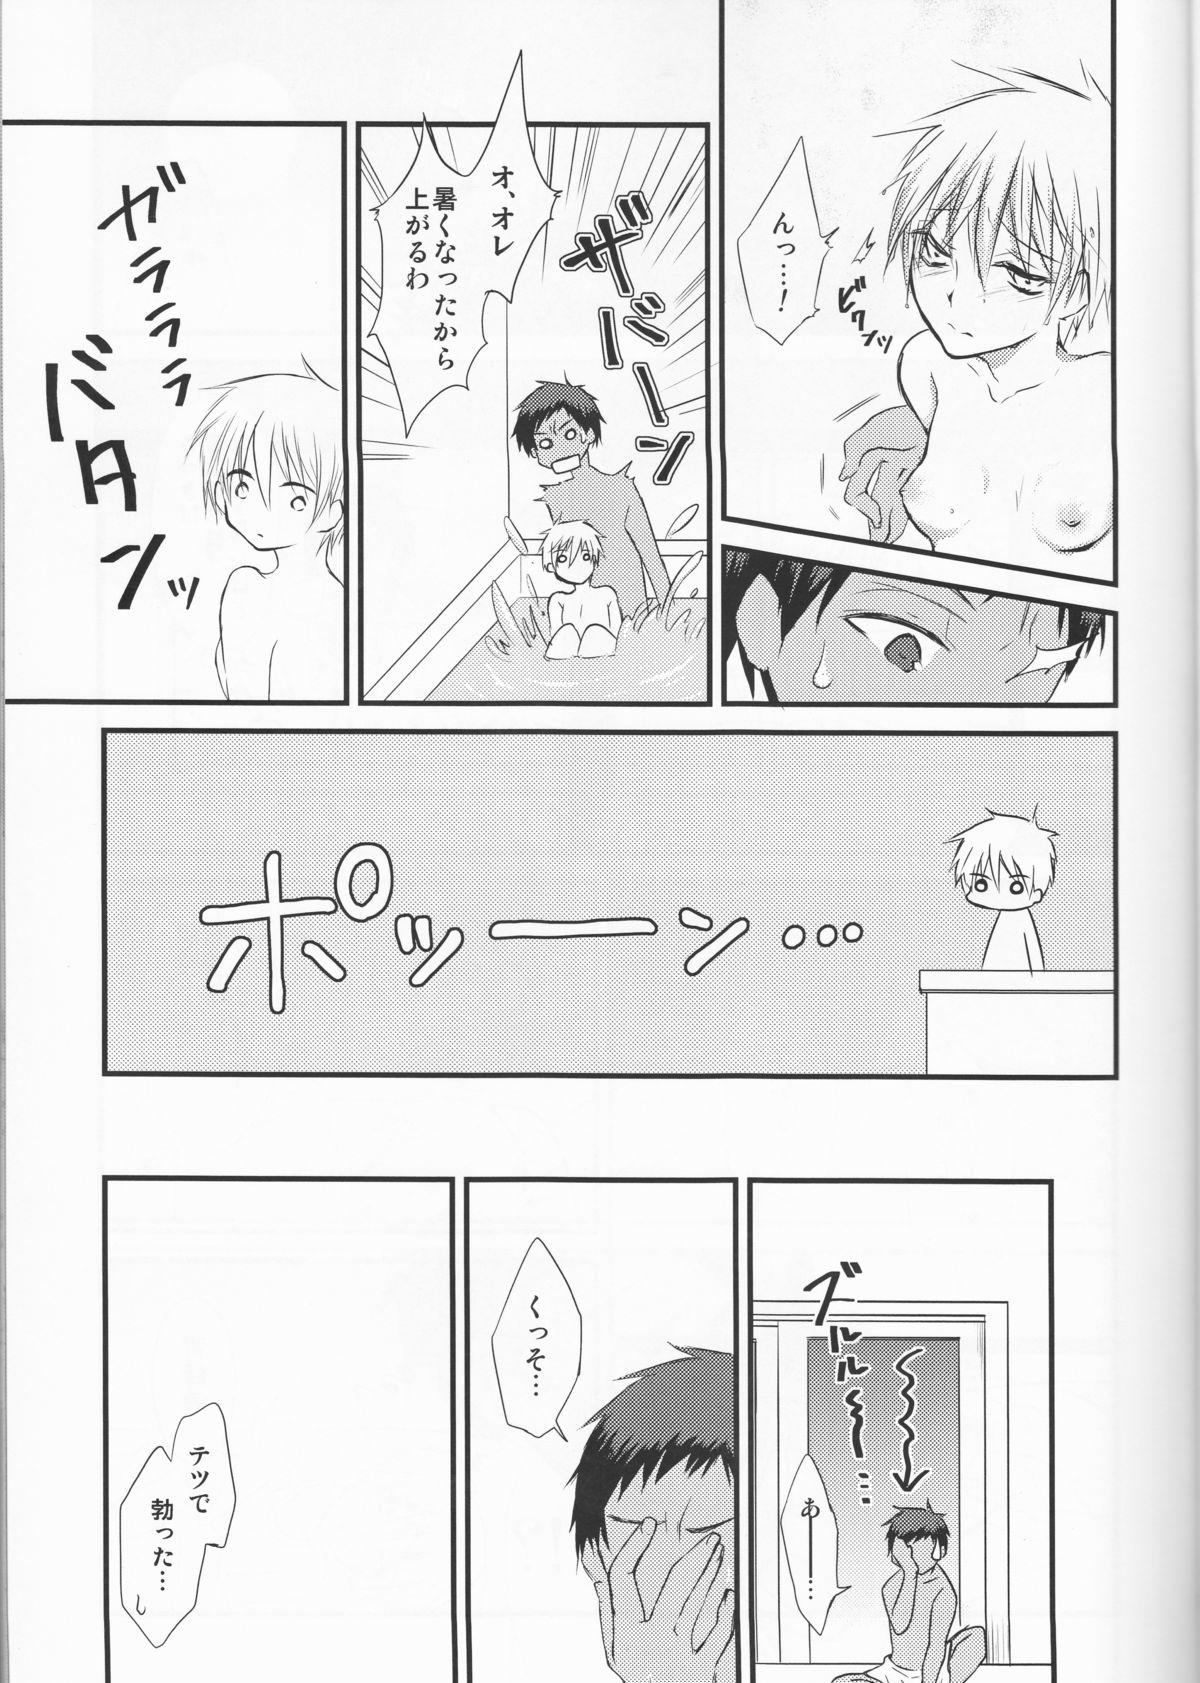 Publico Yesterday of his and her tomorrow - Kuroko no basuke Yanks Featured - Page 11